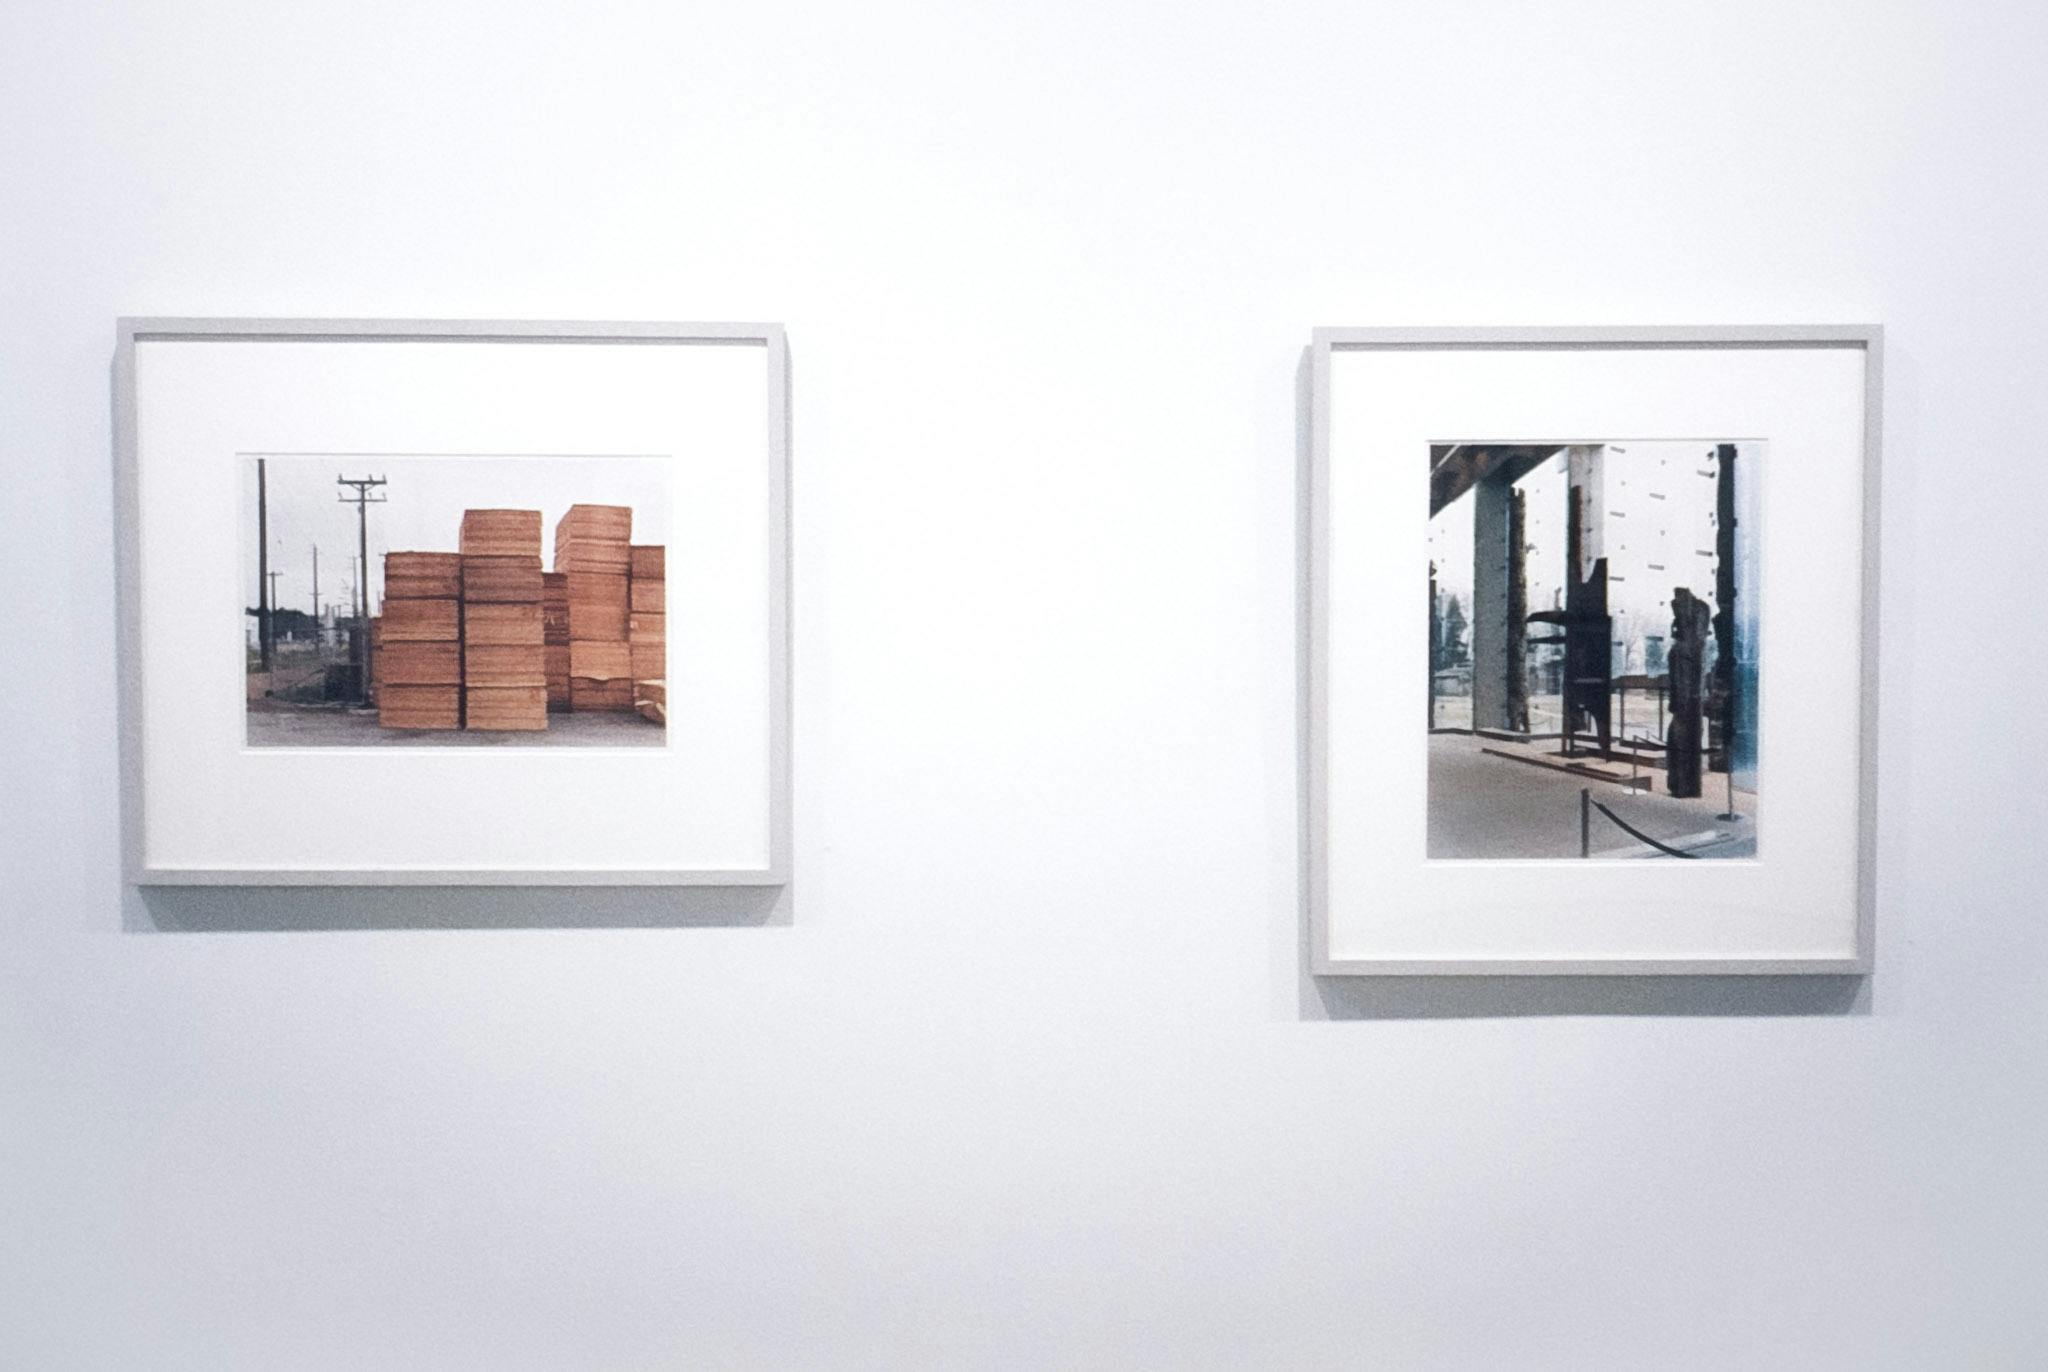 A closeup of 2 framed photographic works on a white wall. On the left, a horizontal photo shows stacks of plywood and cell towers. The vertical one on the right, shows what looks like a museum lobby.